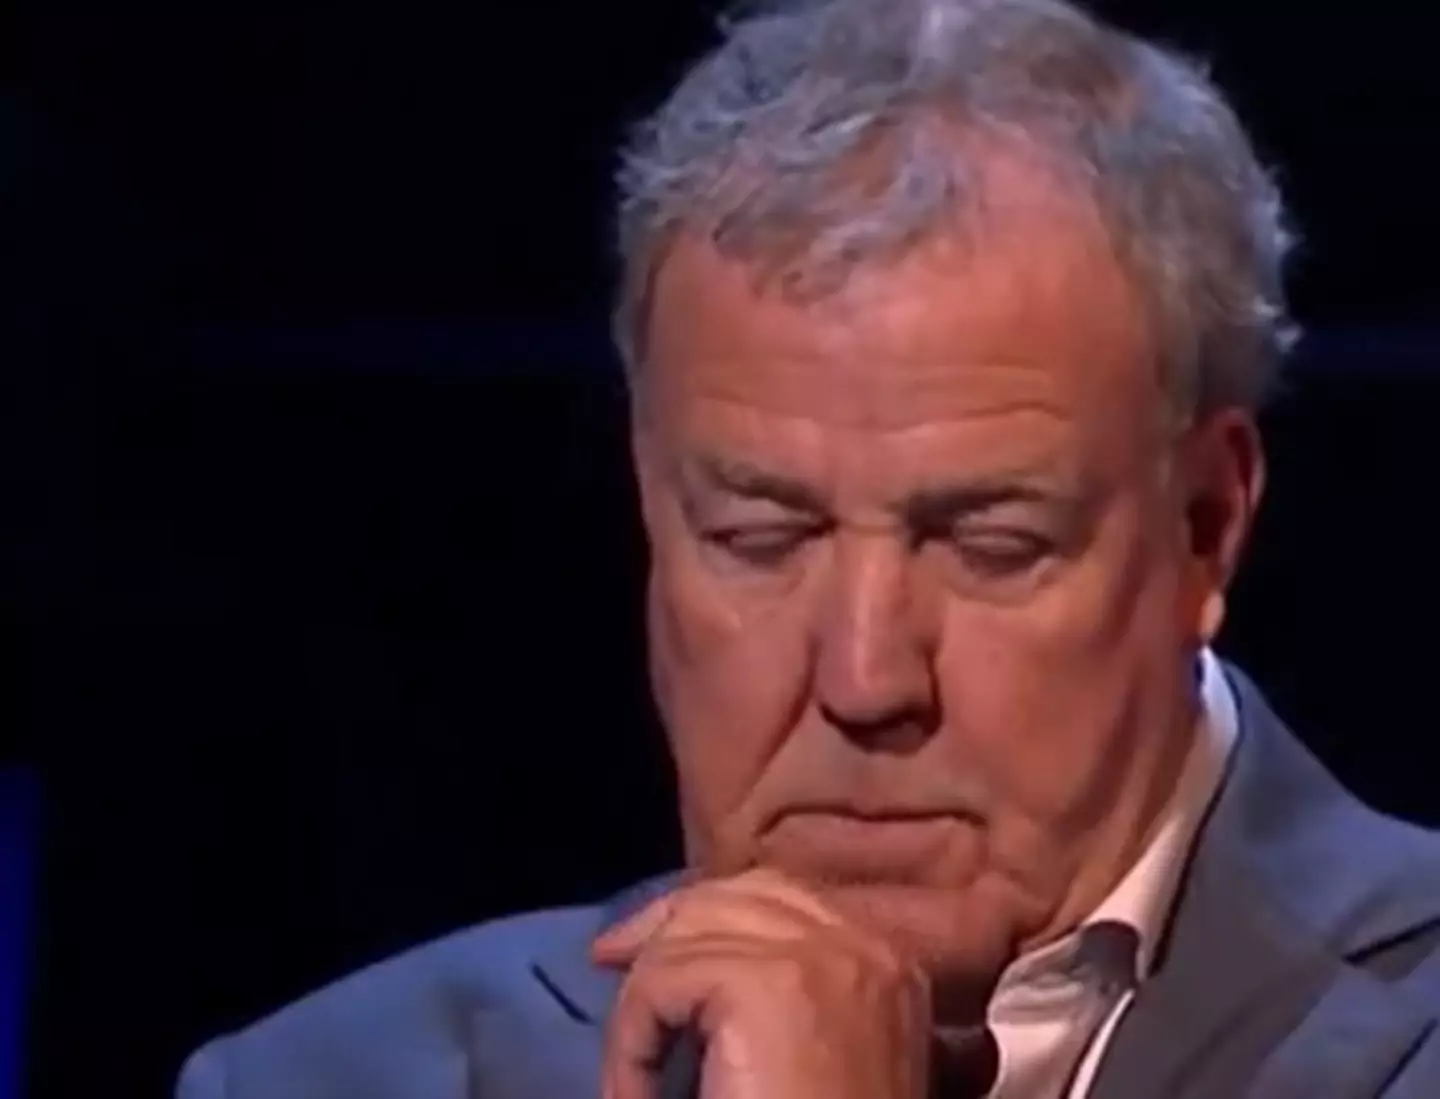 Viewers could see the moment Jeremy Clarkson realised Svein had misread the question.